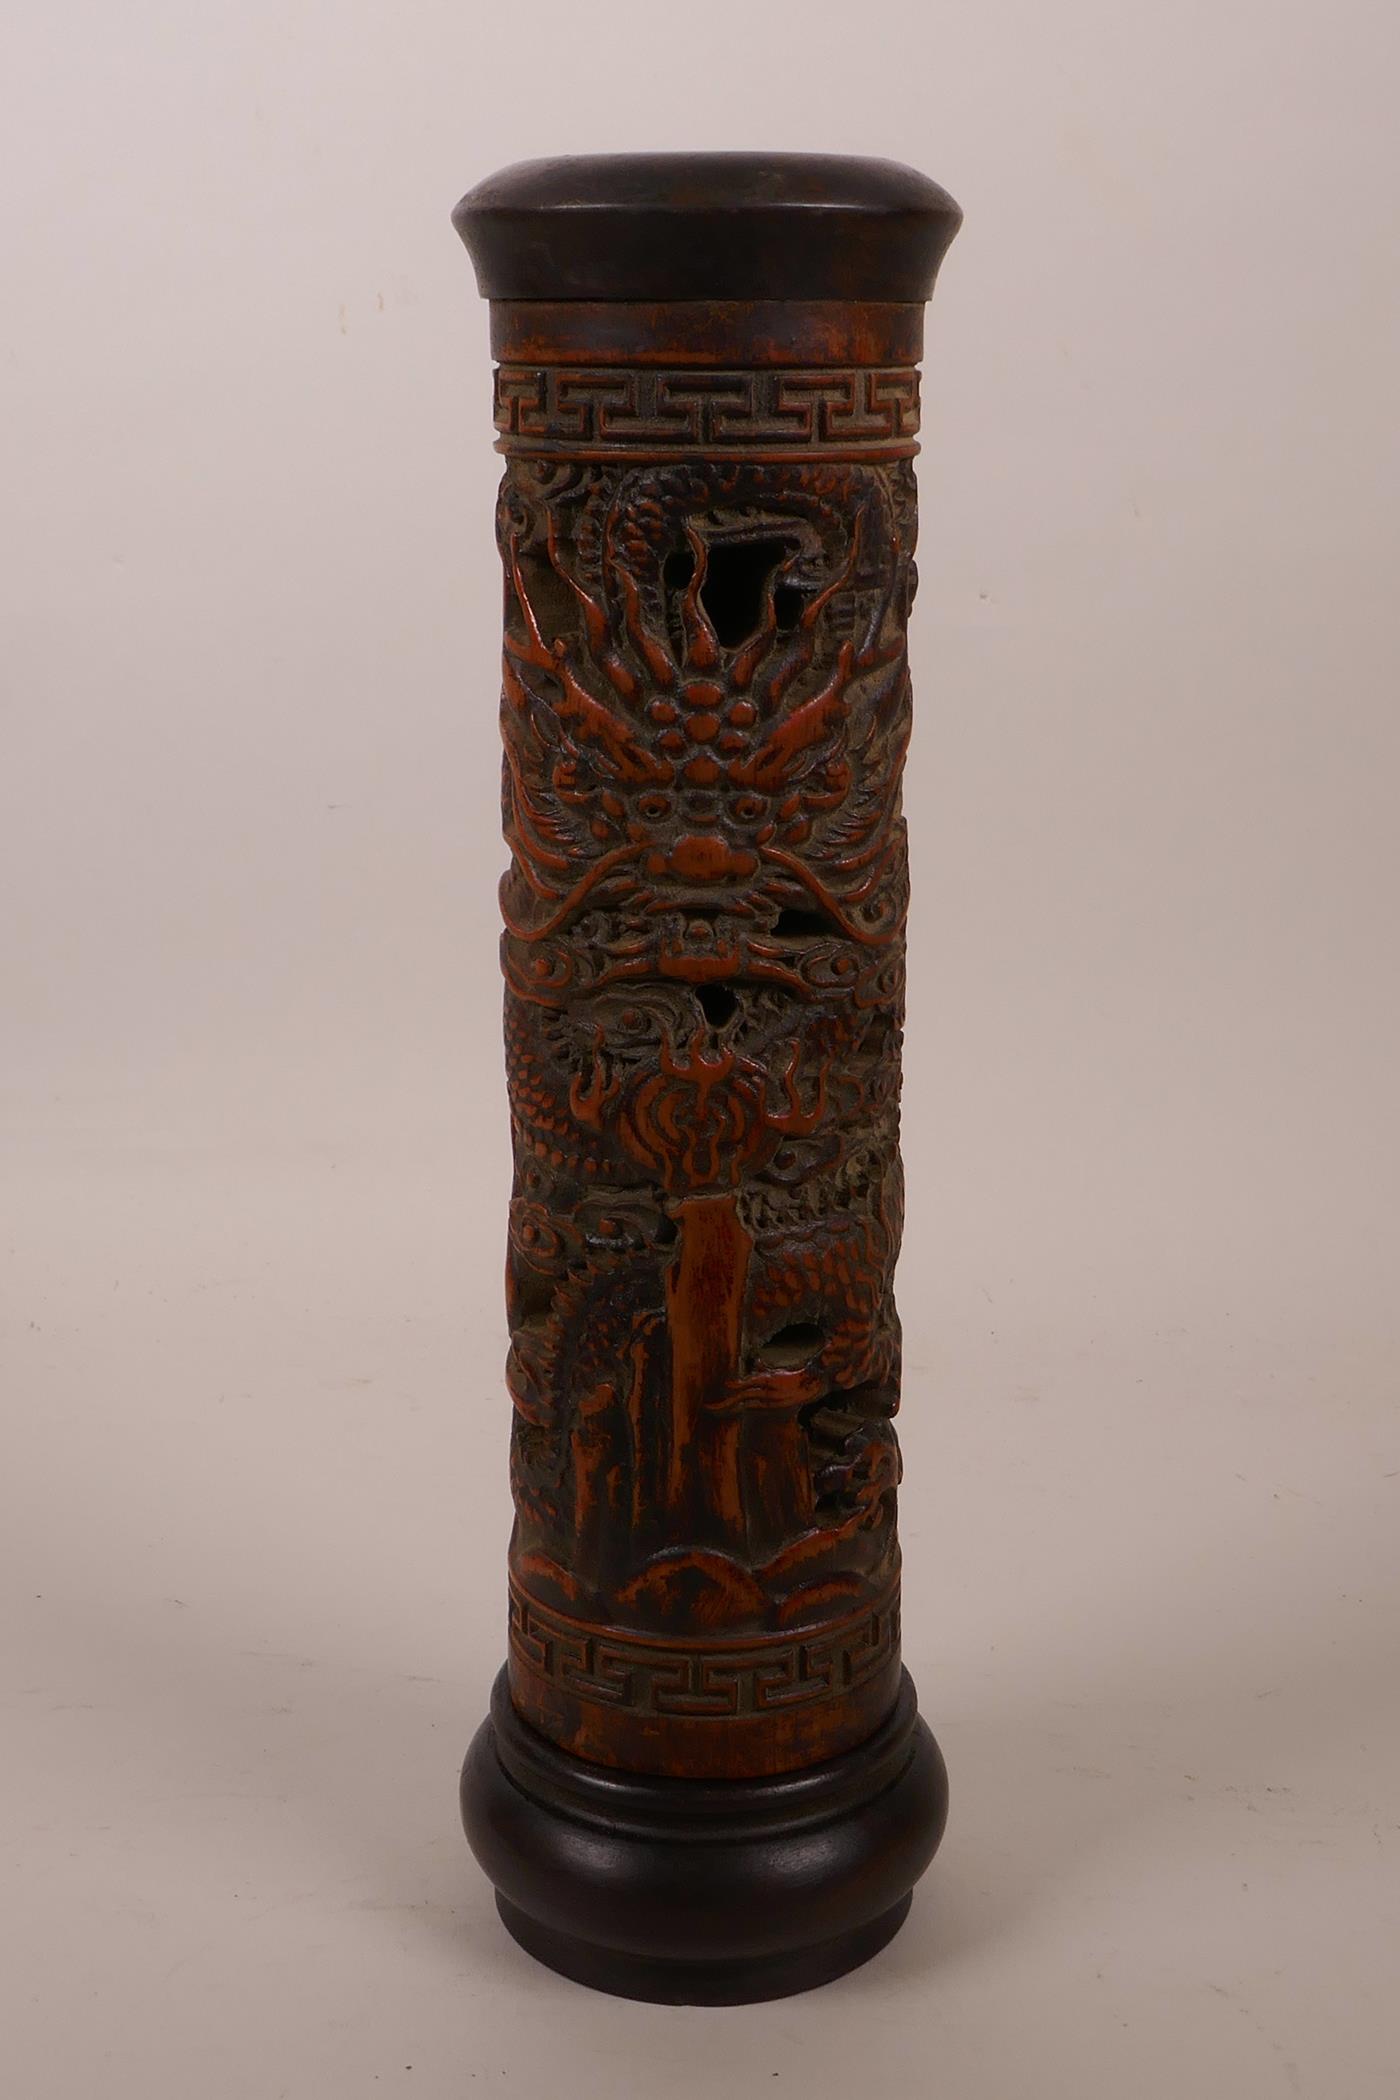 A Chinese bamboo and hardwood cylinder incense burner with carved and pierced dragon decoration, 10"